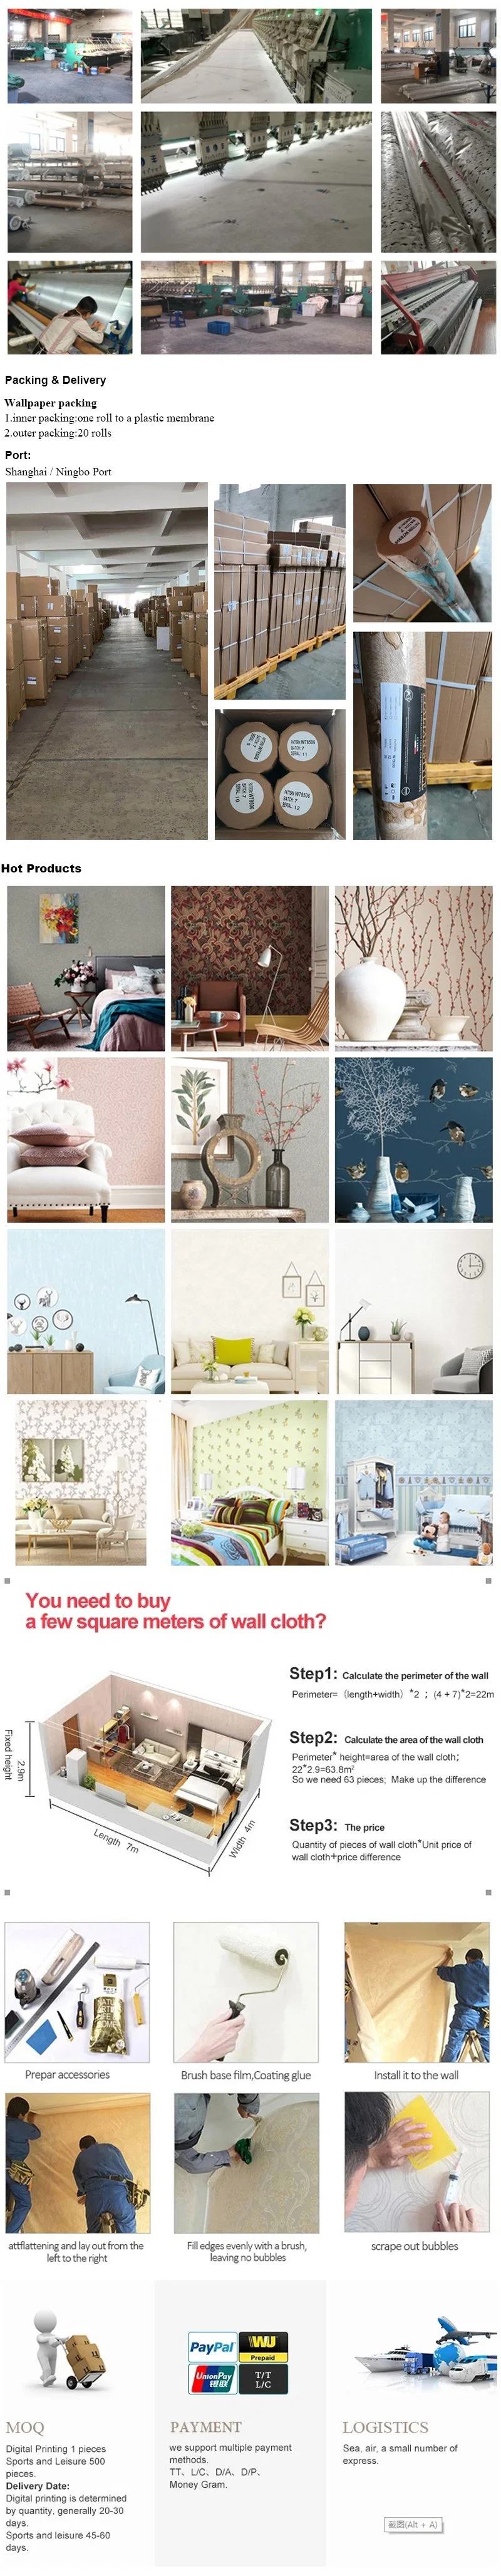 Waterproof Color Non-Woven Floral Plain Wall Covering Fabric Jacquard Wallpaper for Home Decoration